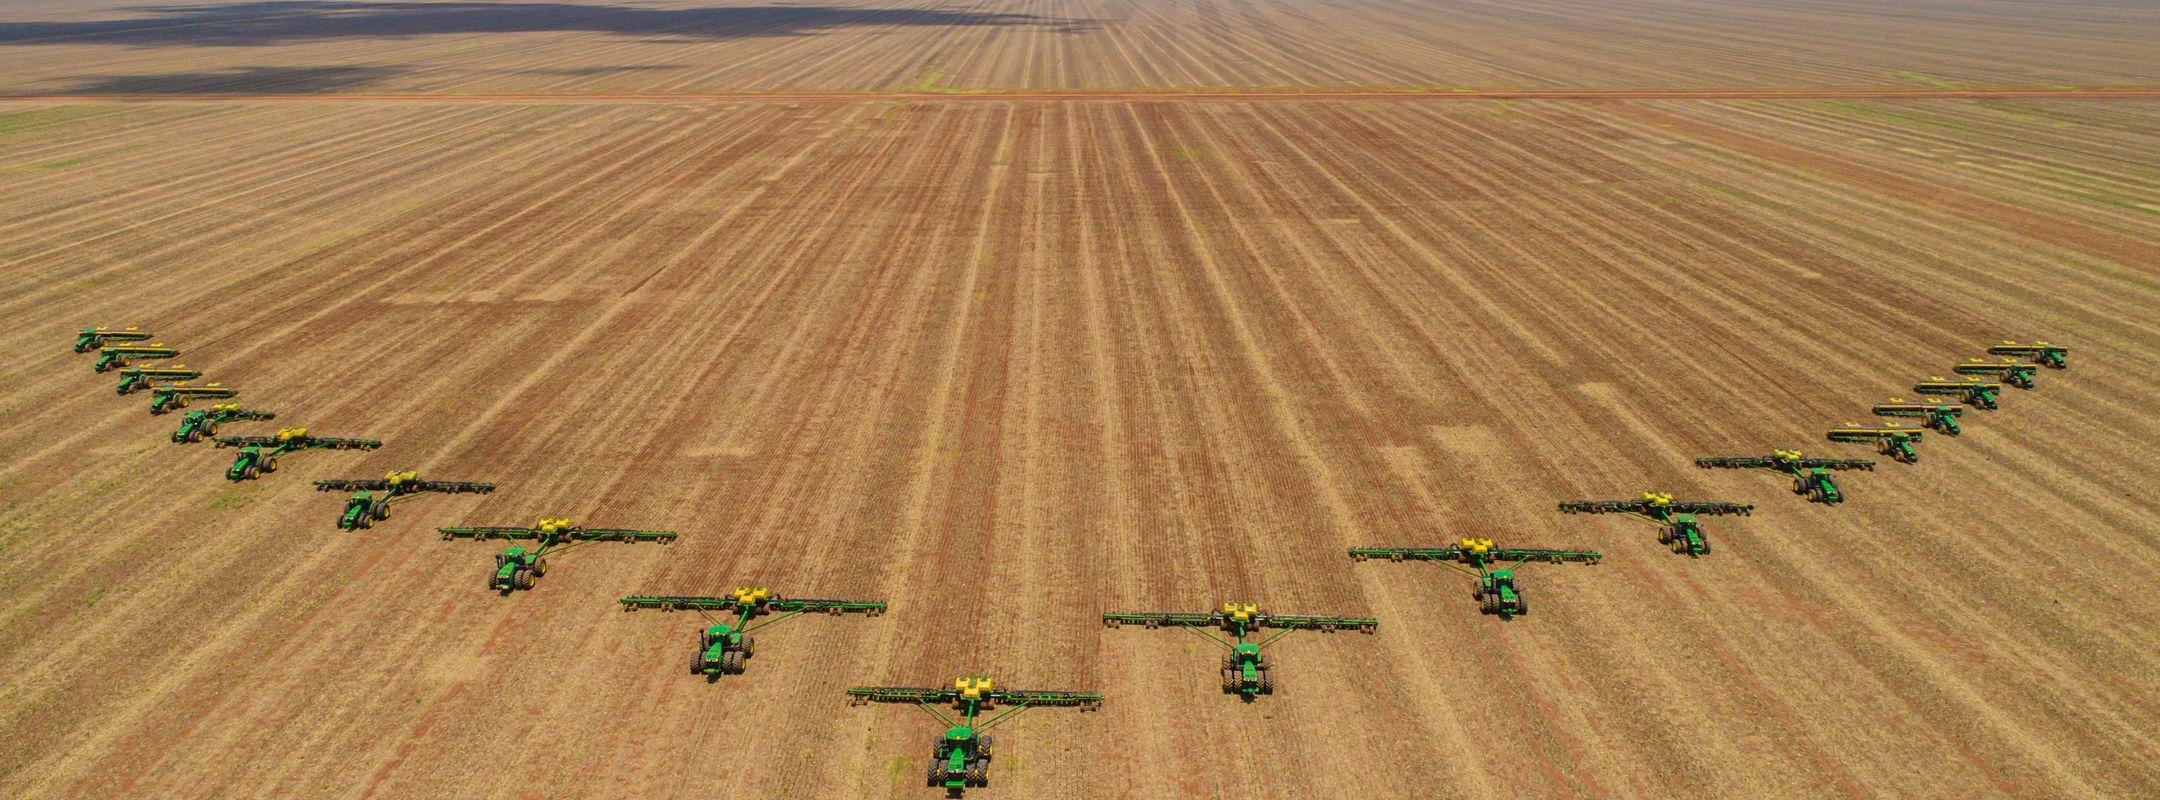 Chapadão do Sul / Mato Grosso do Sul / Brazil / February 26, 2020: Agriculture, Aerial image, number of machines in arrow motion, front of tractors that prepare the land to sow in the field